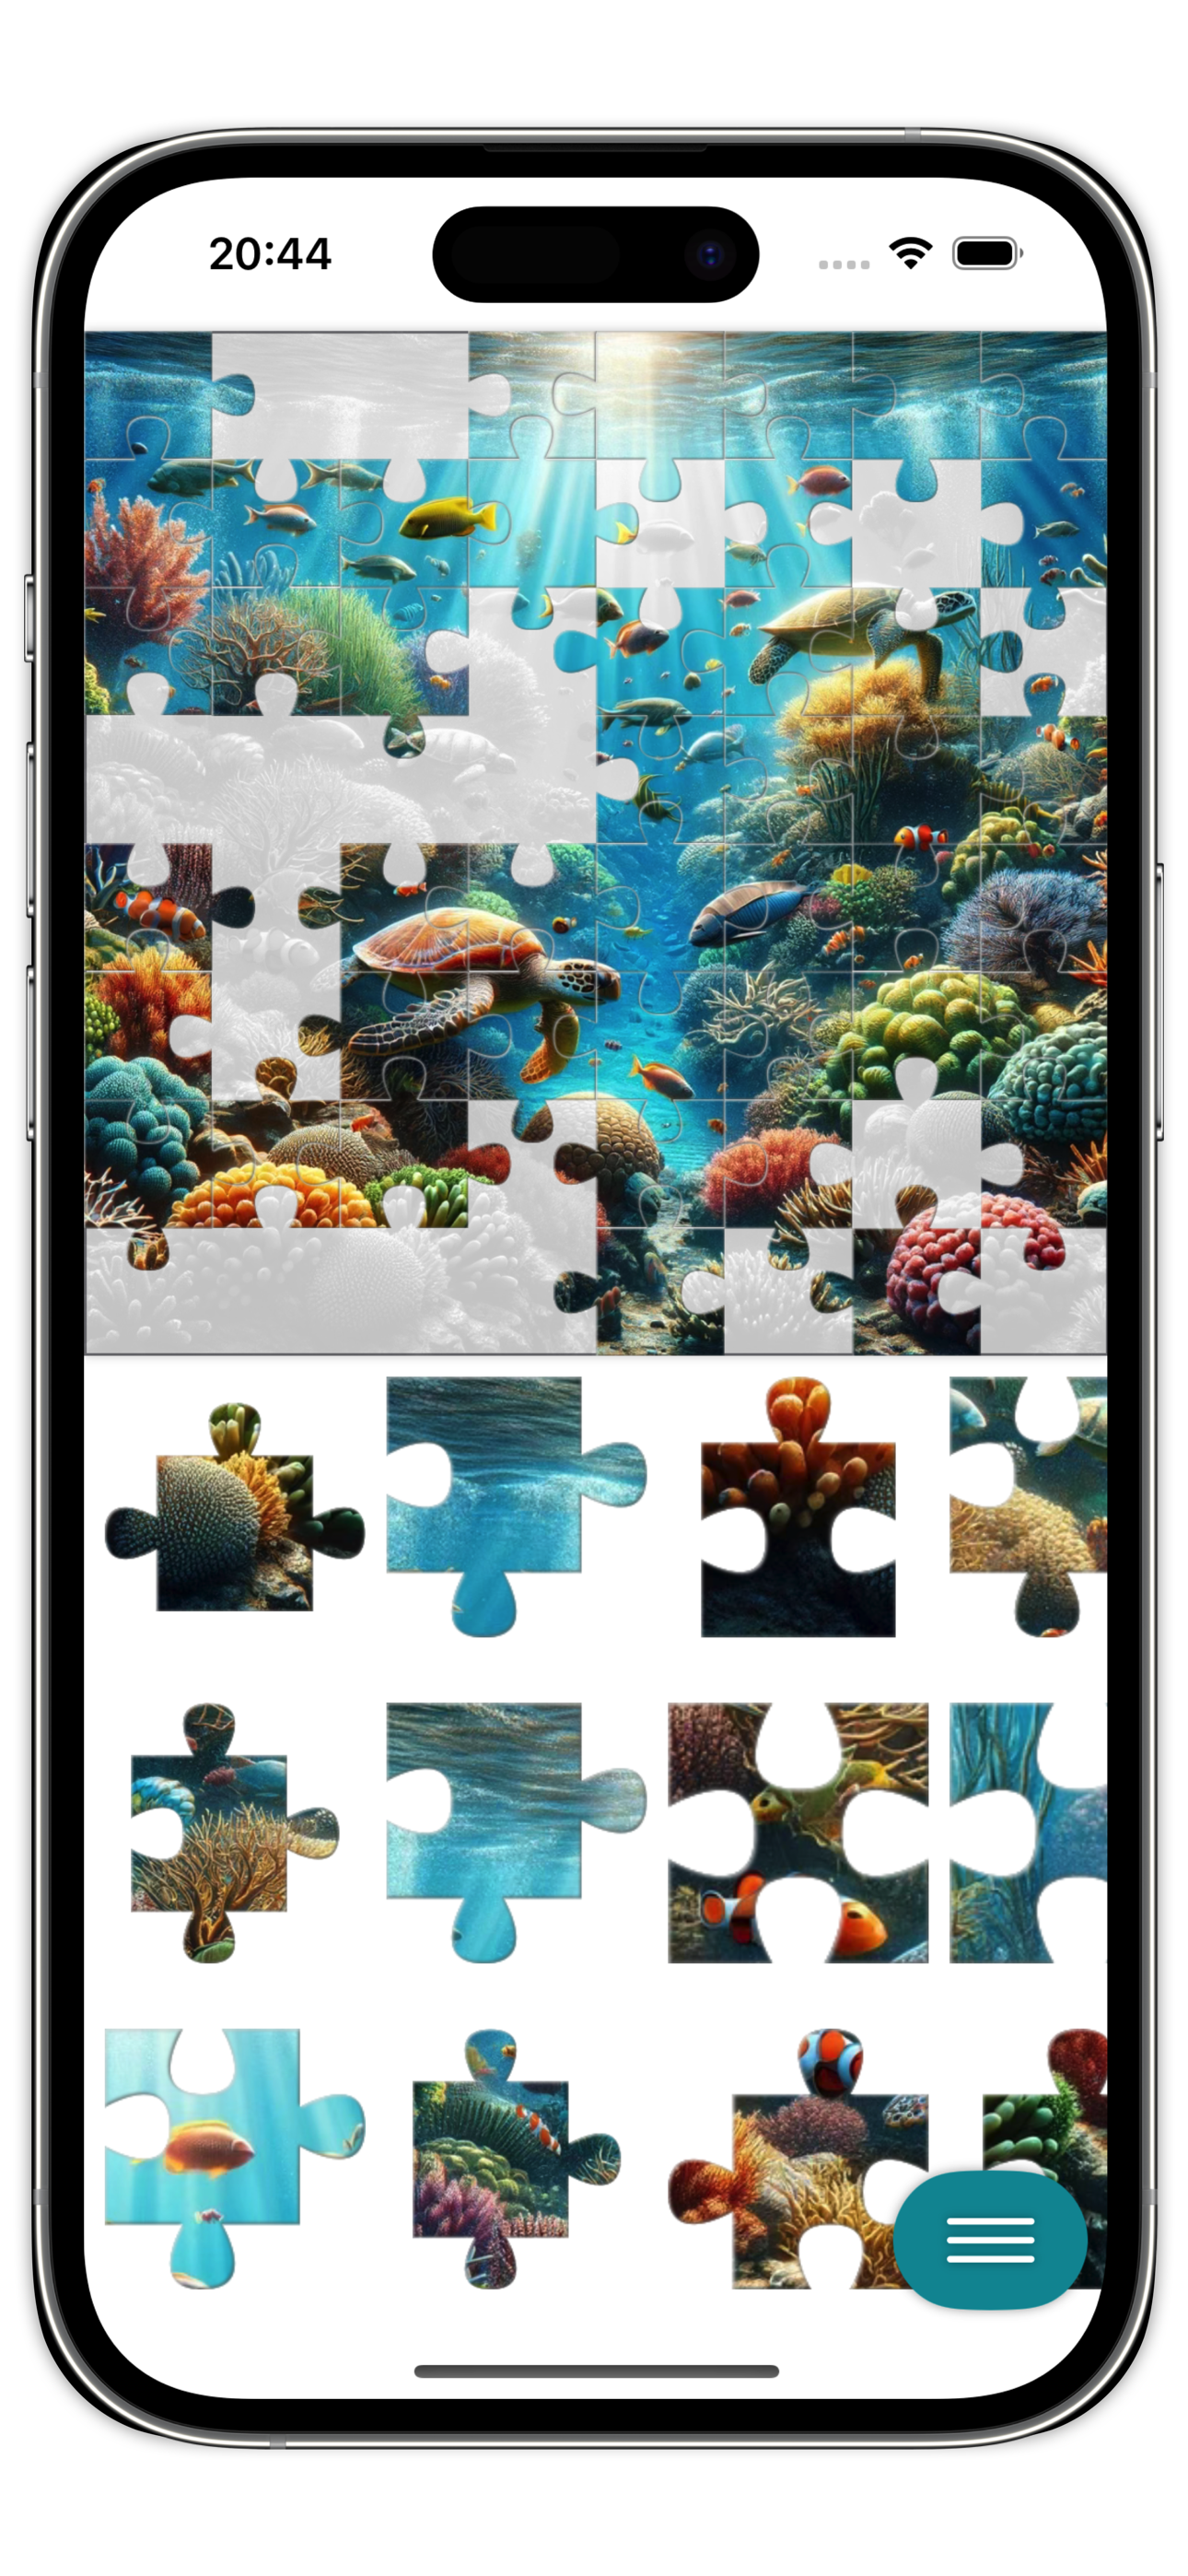 Puzzles Daily App Running On iPhone